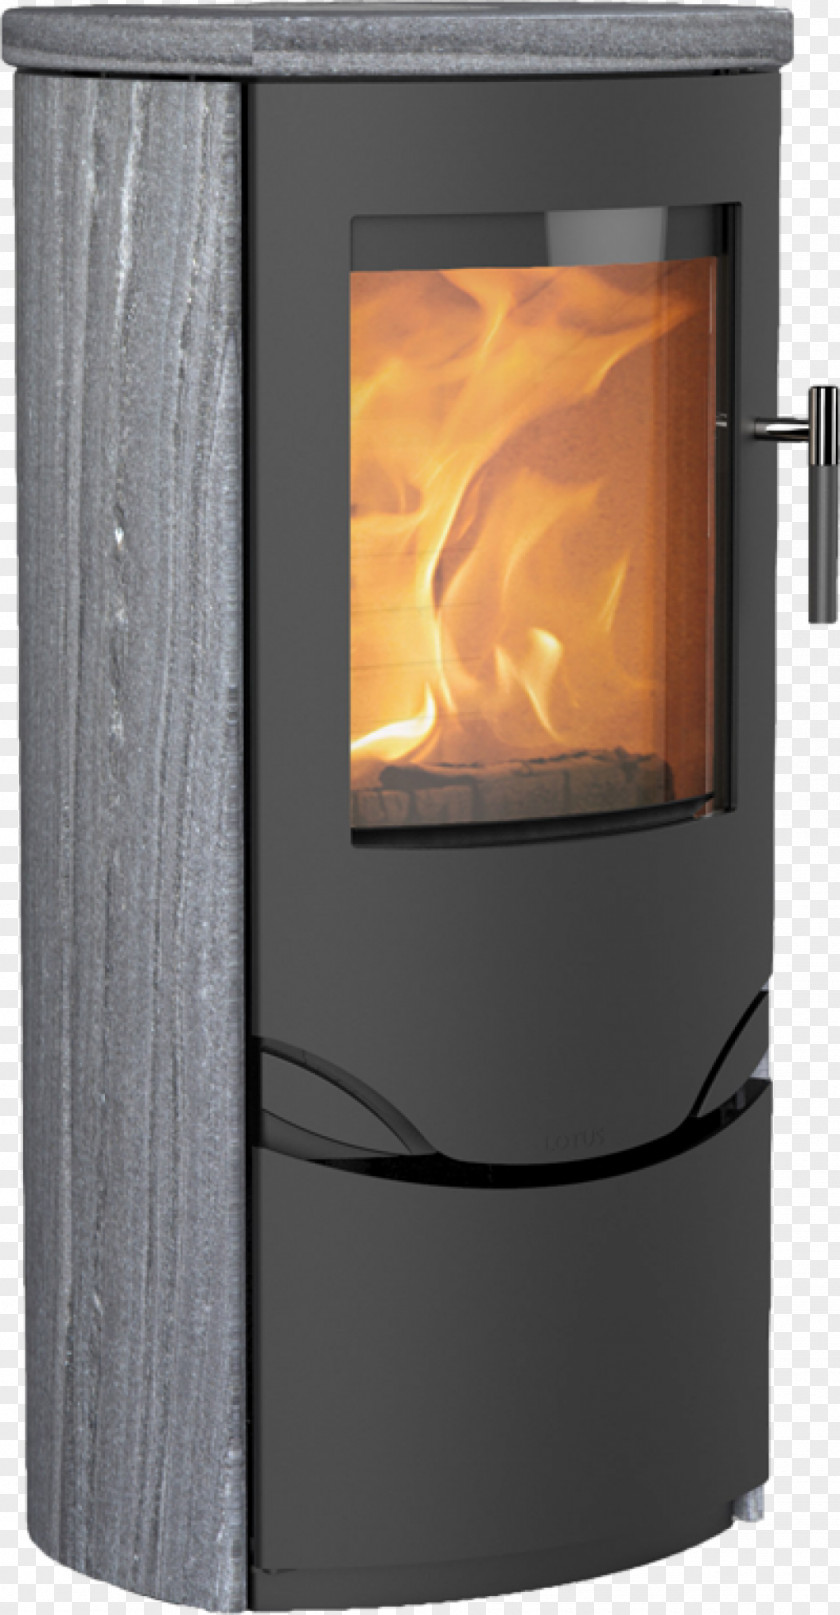 Stove Wood Stoves Kaminofen Heat Fireplace PNG